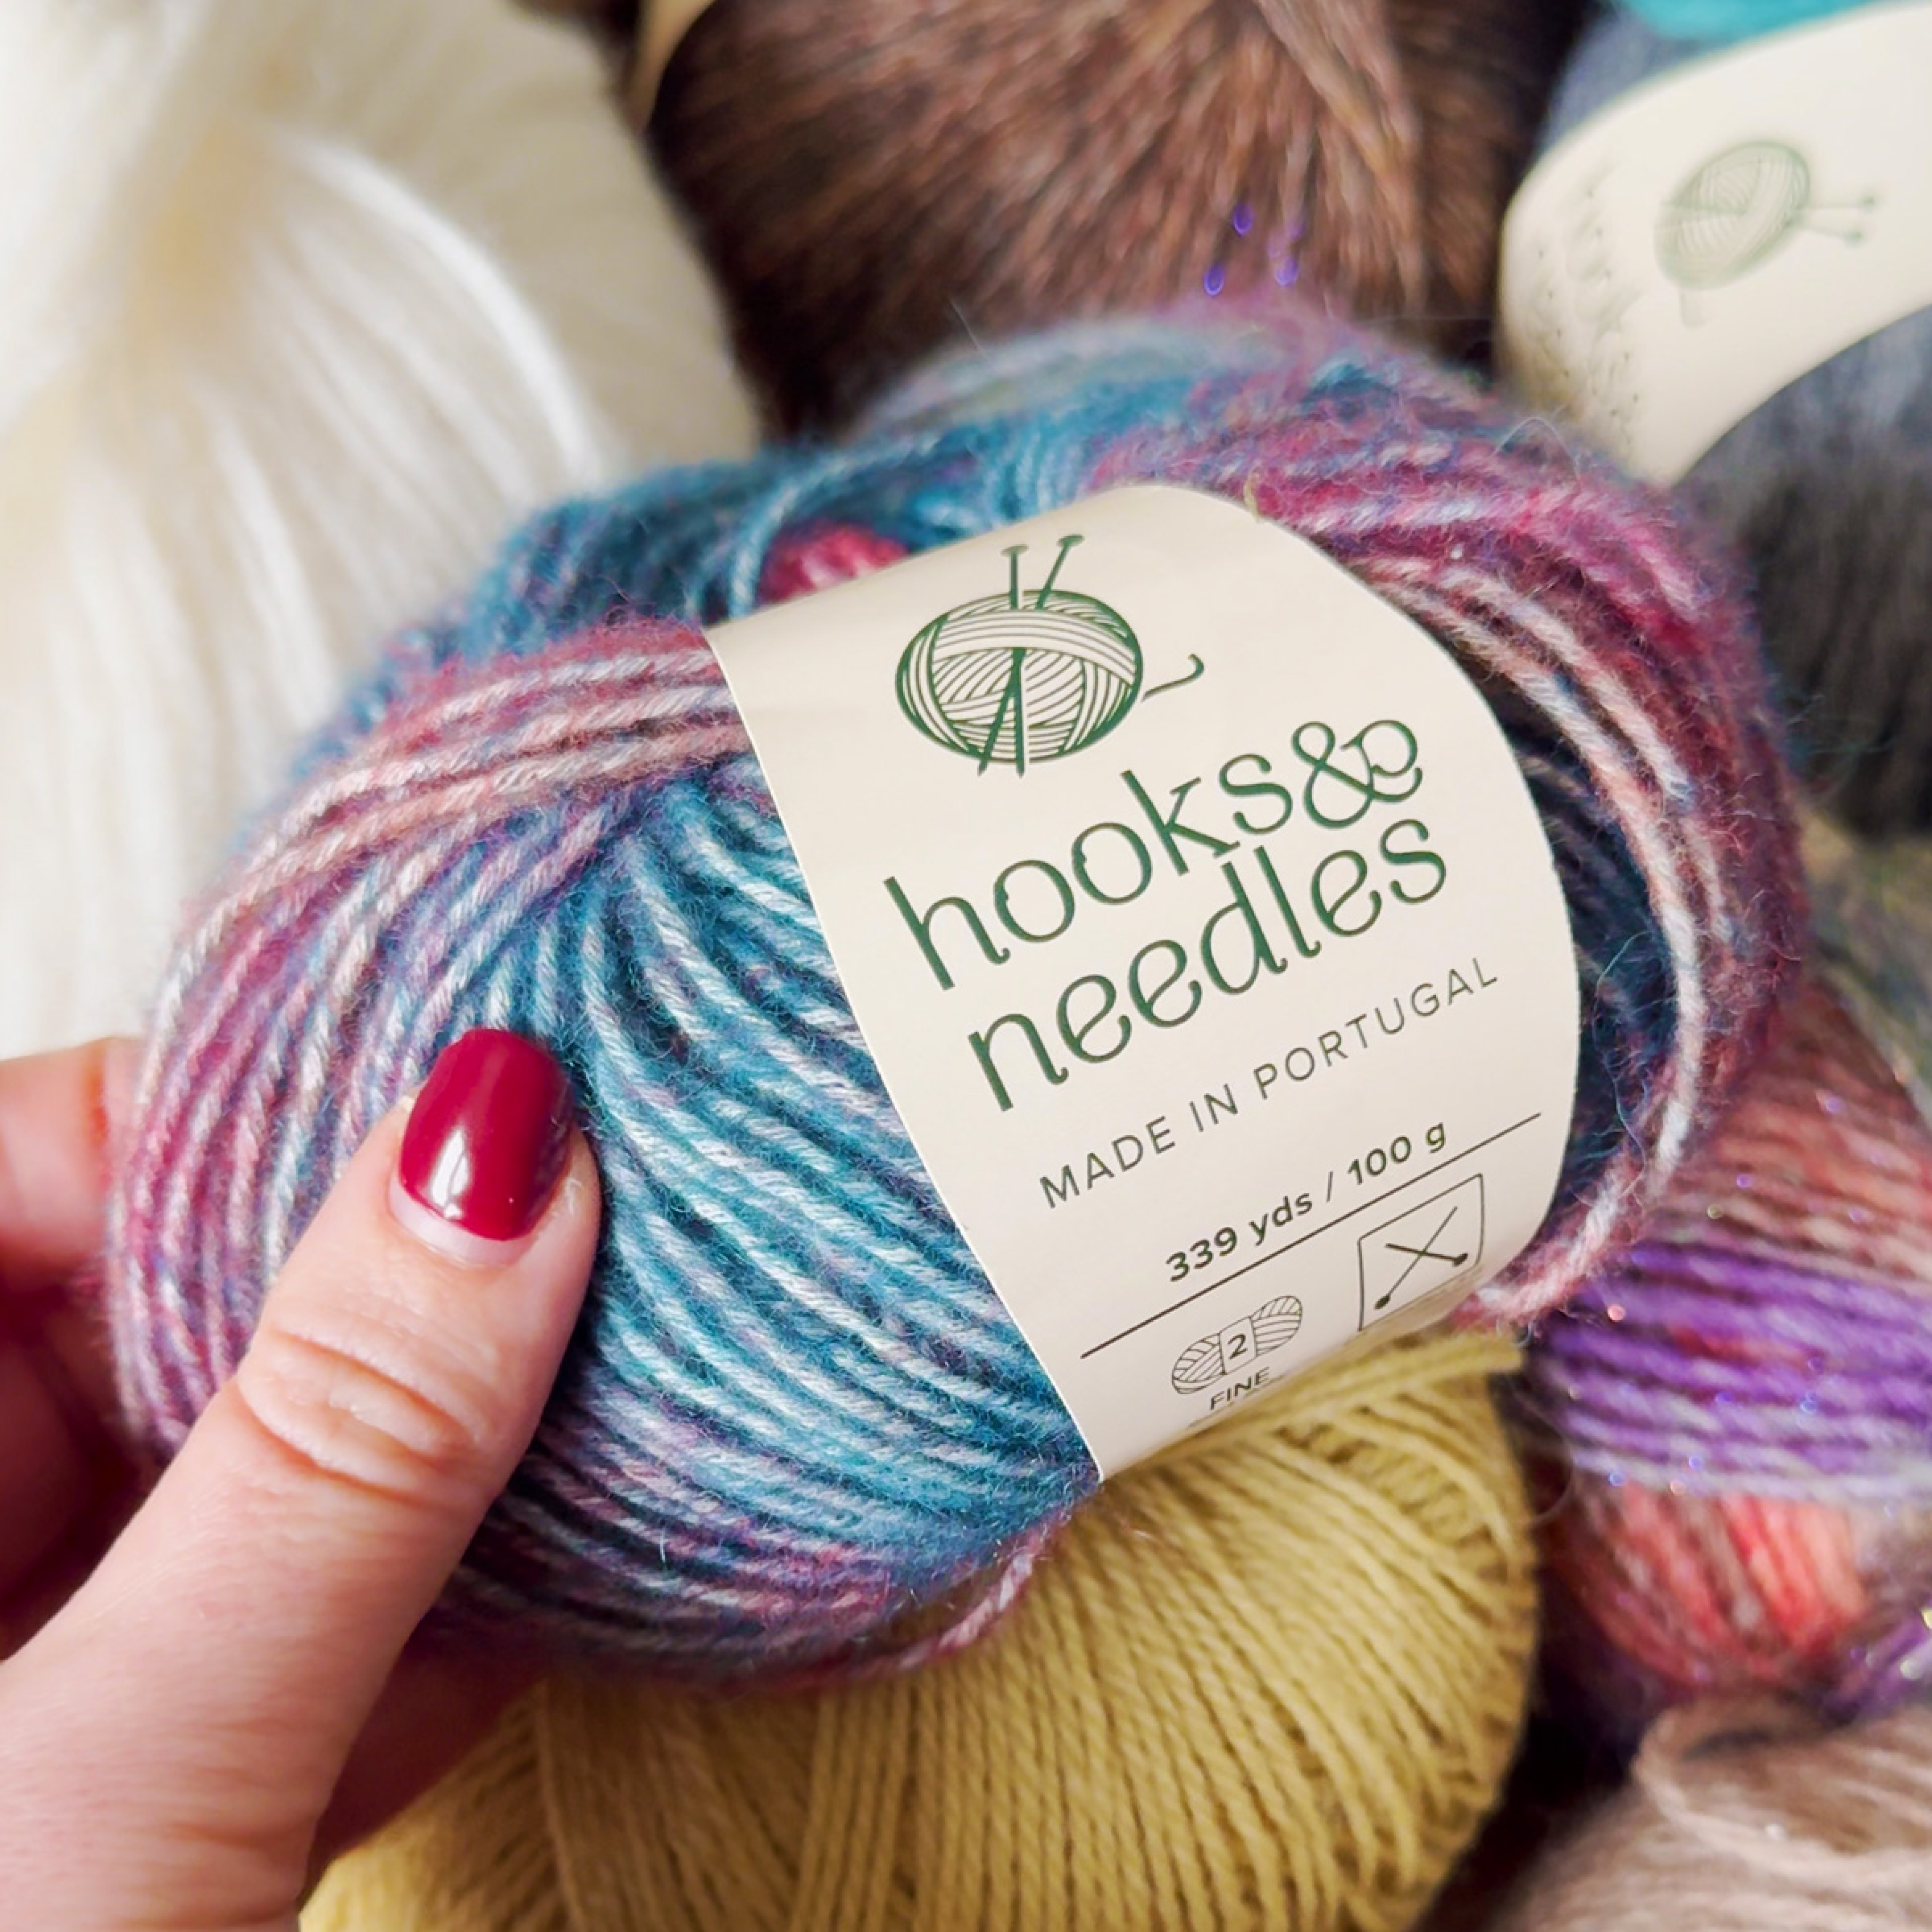 A person holding a skein of multicolored yarn with a label that reads "12-Month-Prepaid Hooks & Needles Subscription Box #16 made in Portugal.